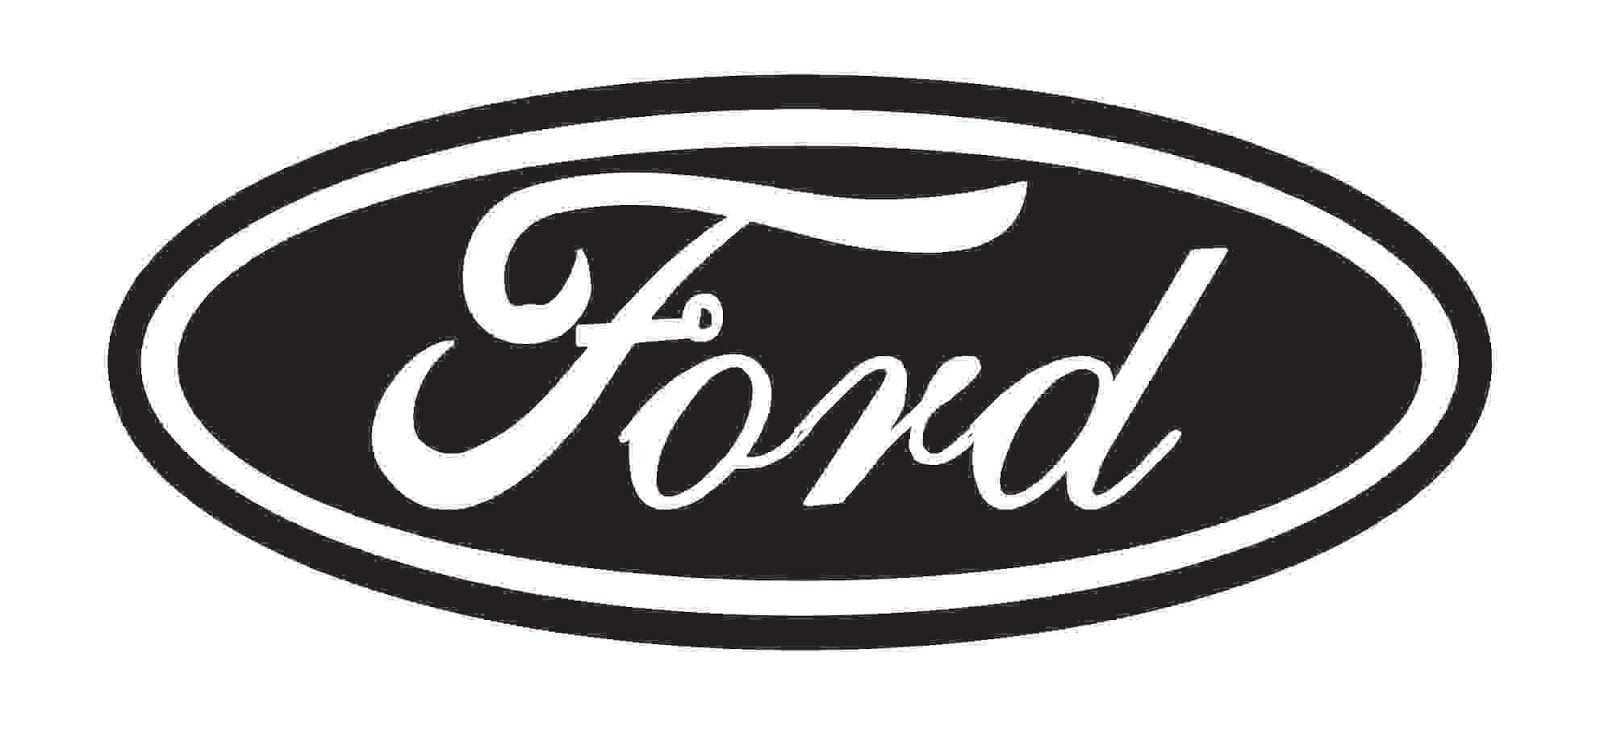 14 Ford Logo Vector Images Ford Logo Vector Clip Art Black Ford Logo Vector and Ford Motor 